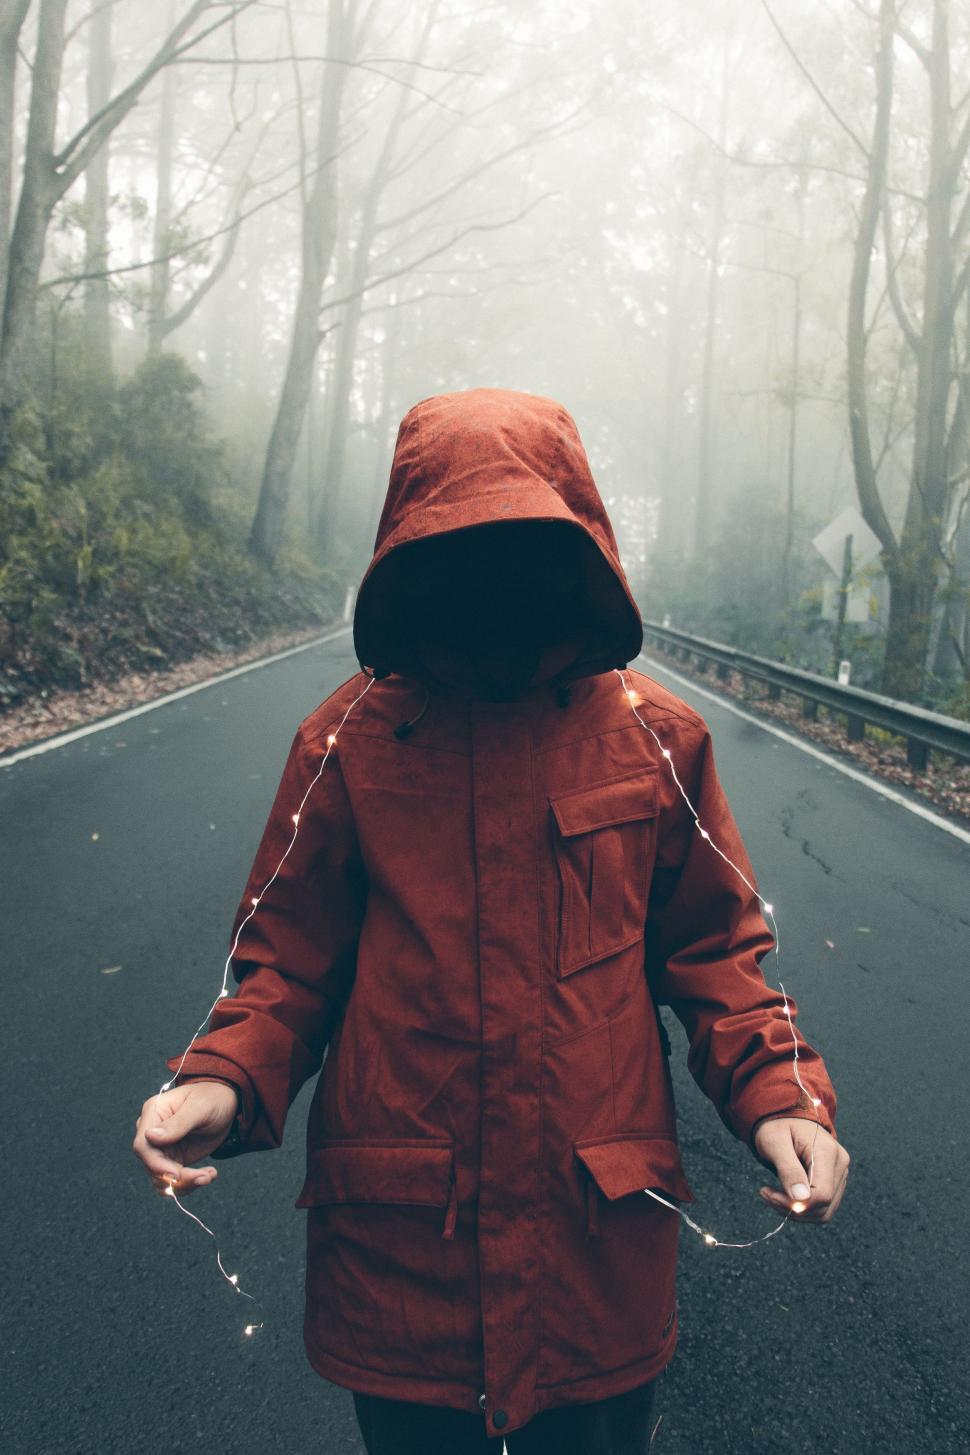 Free Image of Person in Red Jacket Walking Down Road 